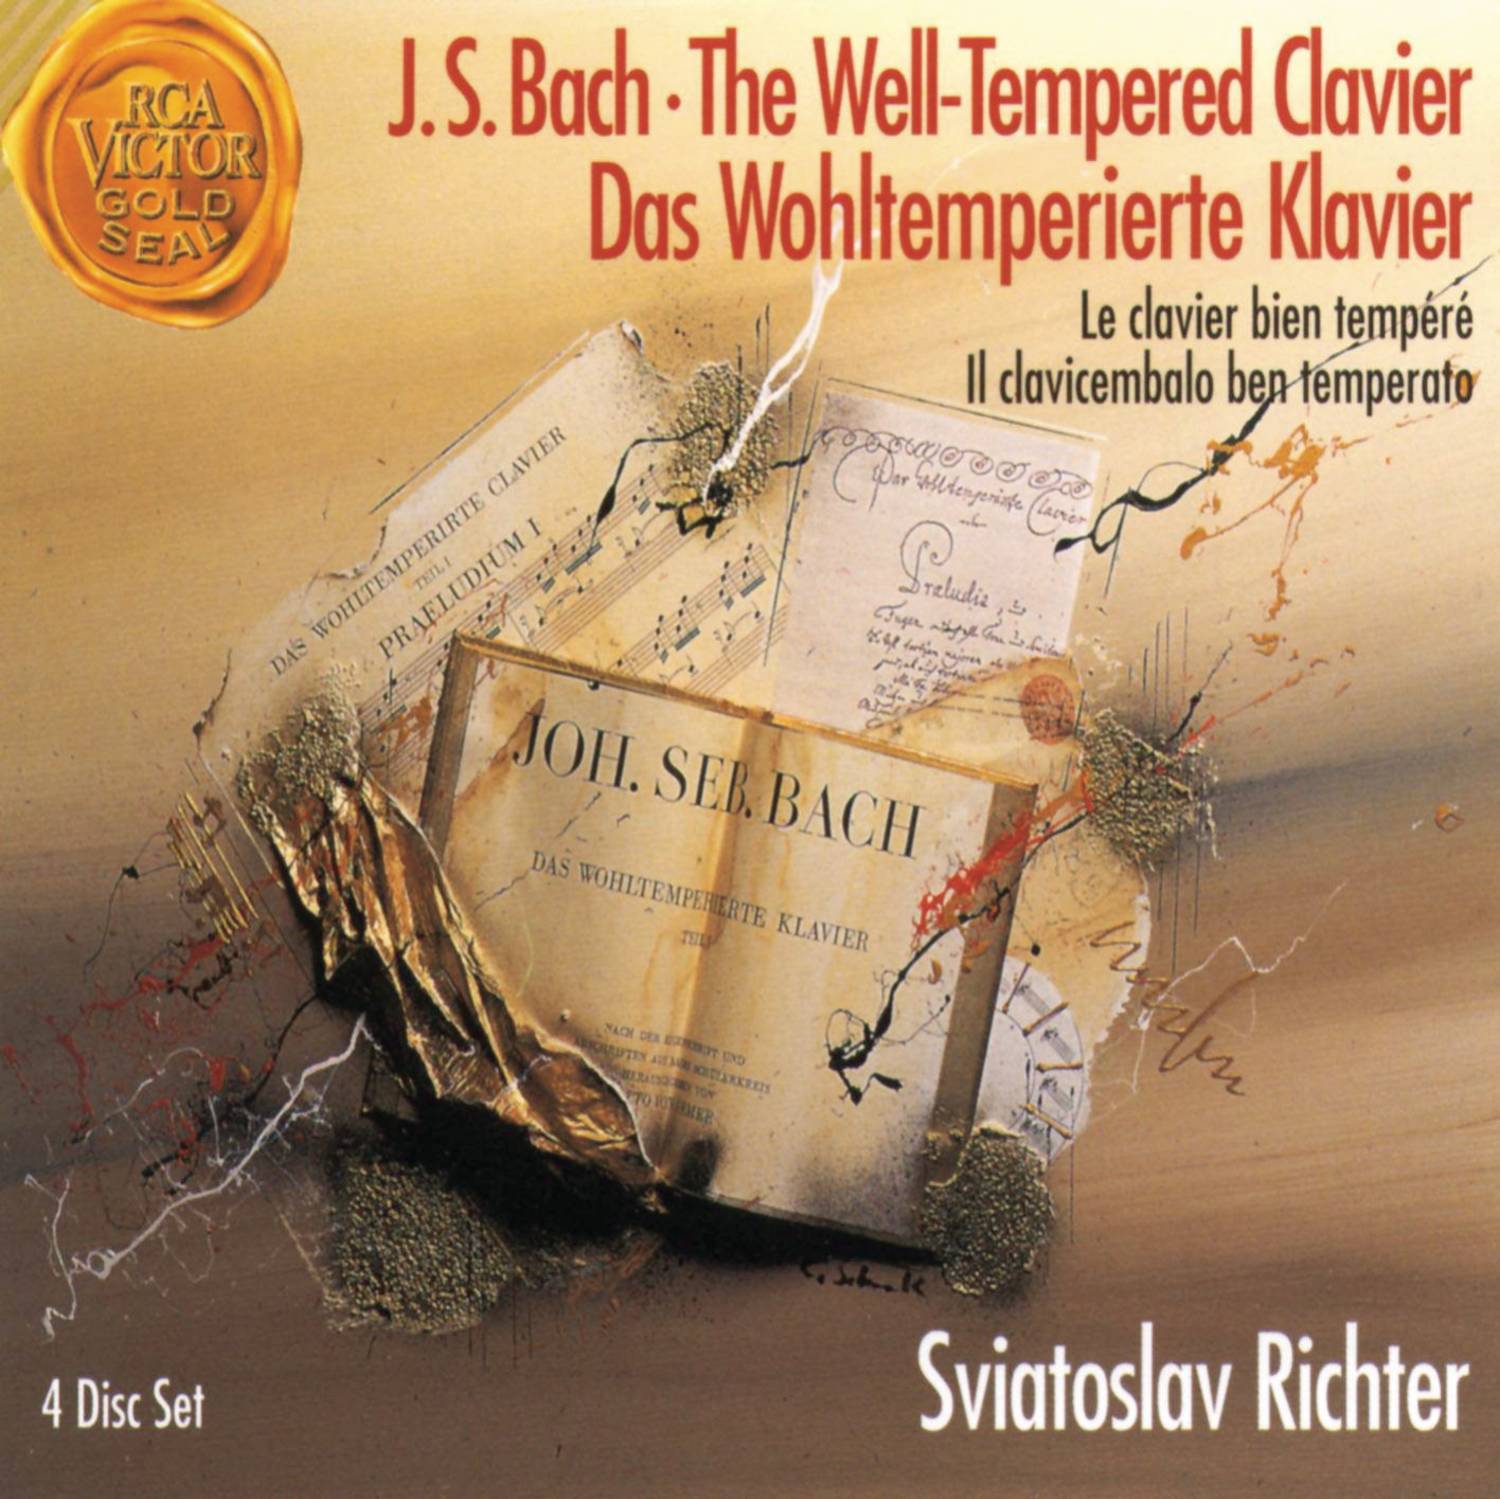 The Well-Tempered Clavier, Book 1:Prelude and Fugue No. 16 in G Minor, BWV 861